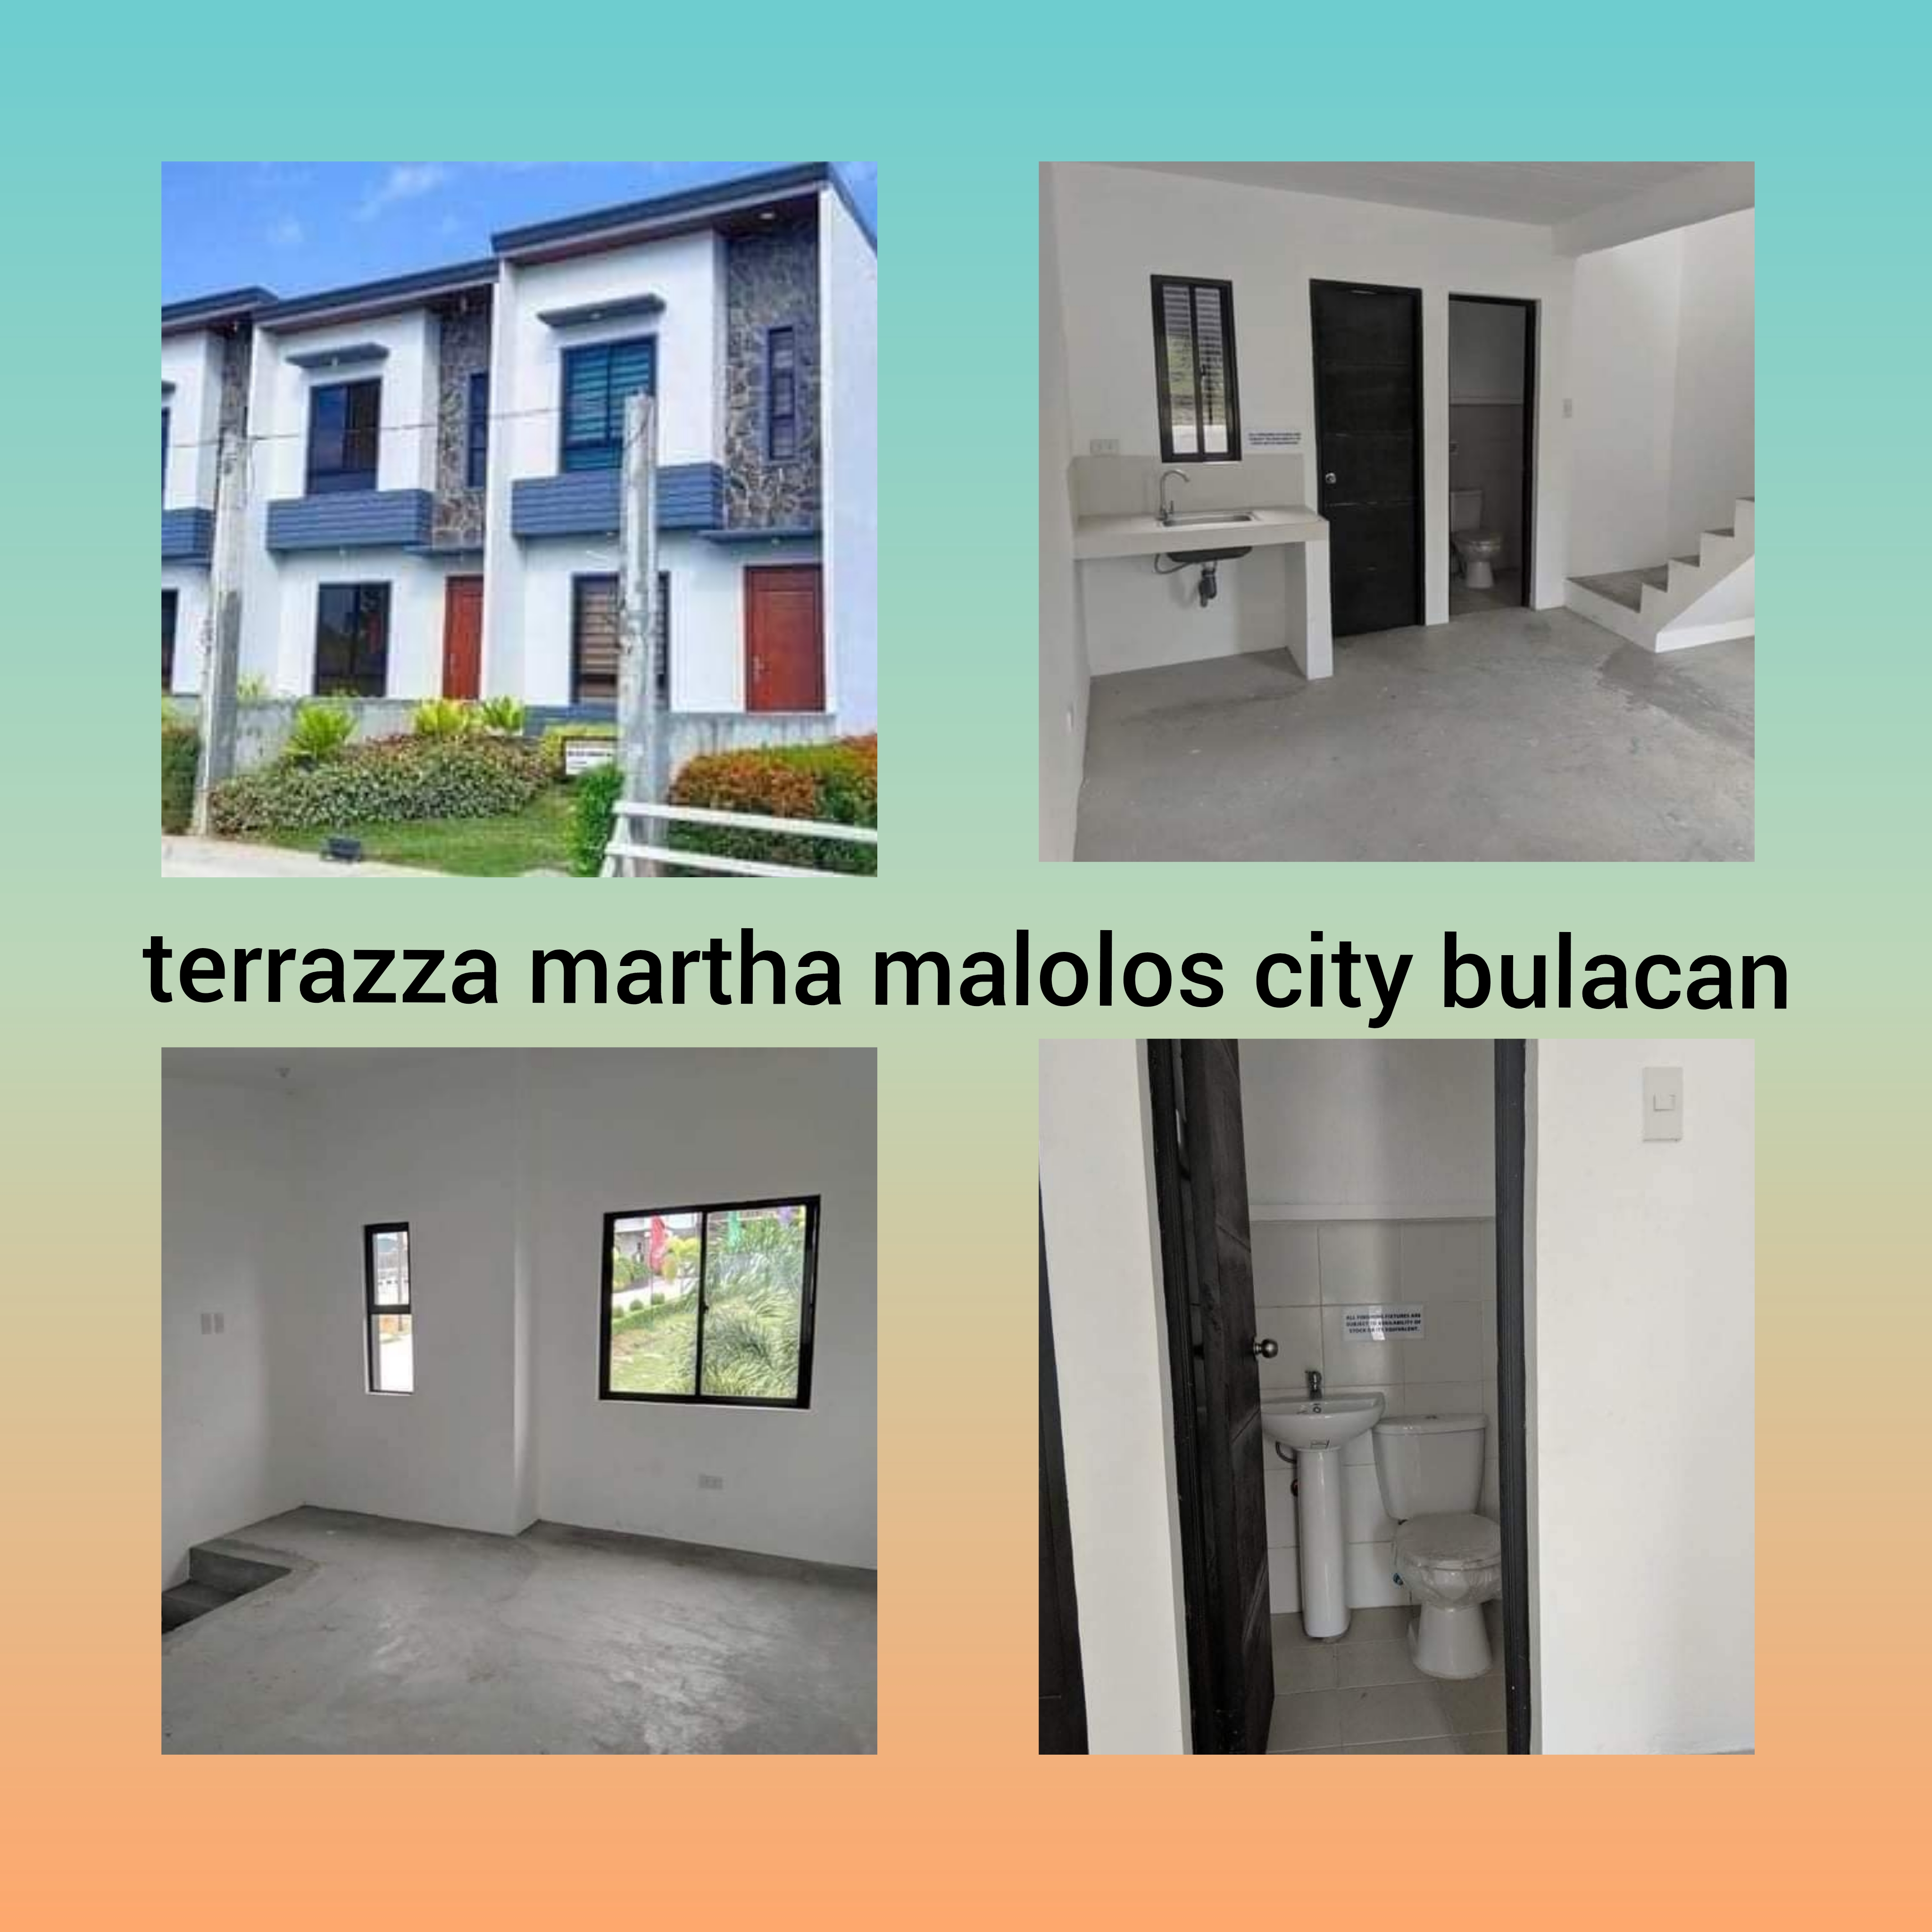 Thru pagibig financing only in Bulacan